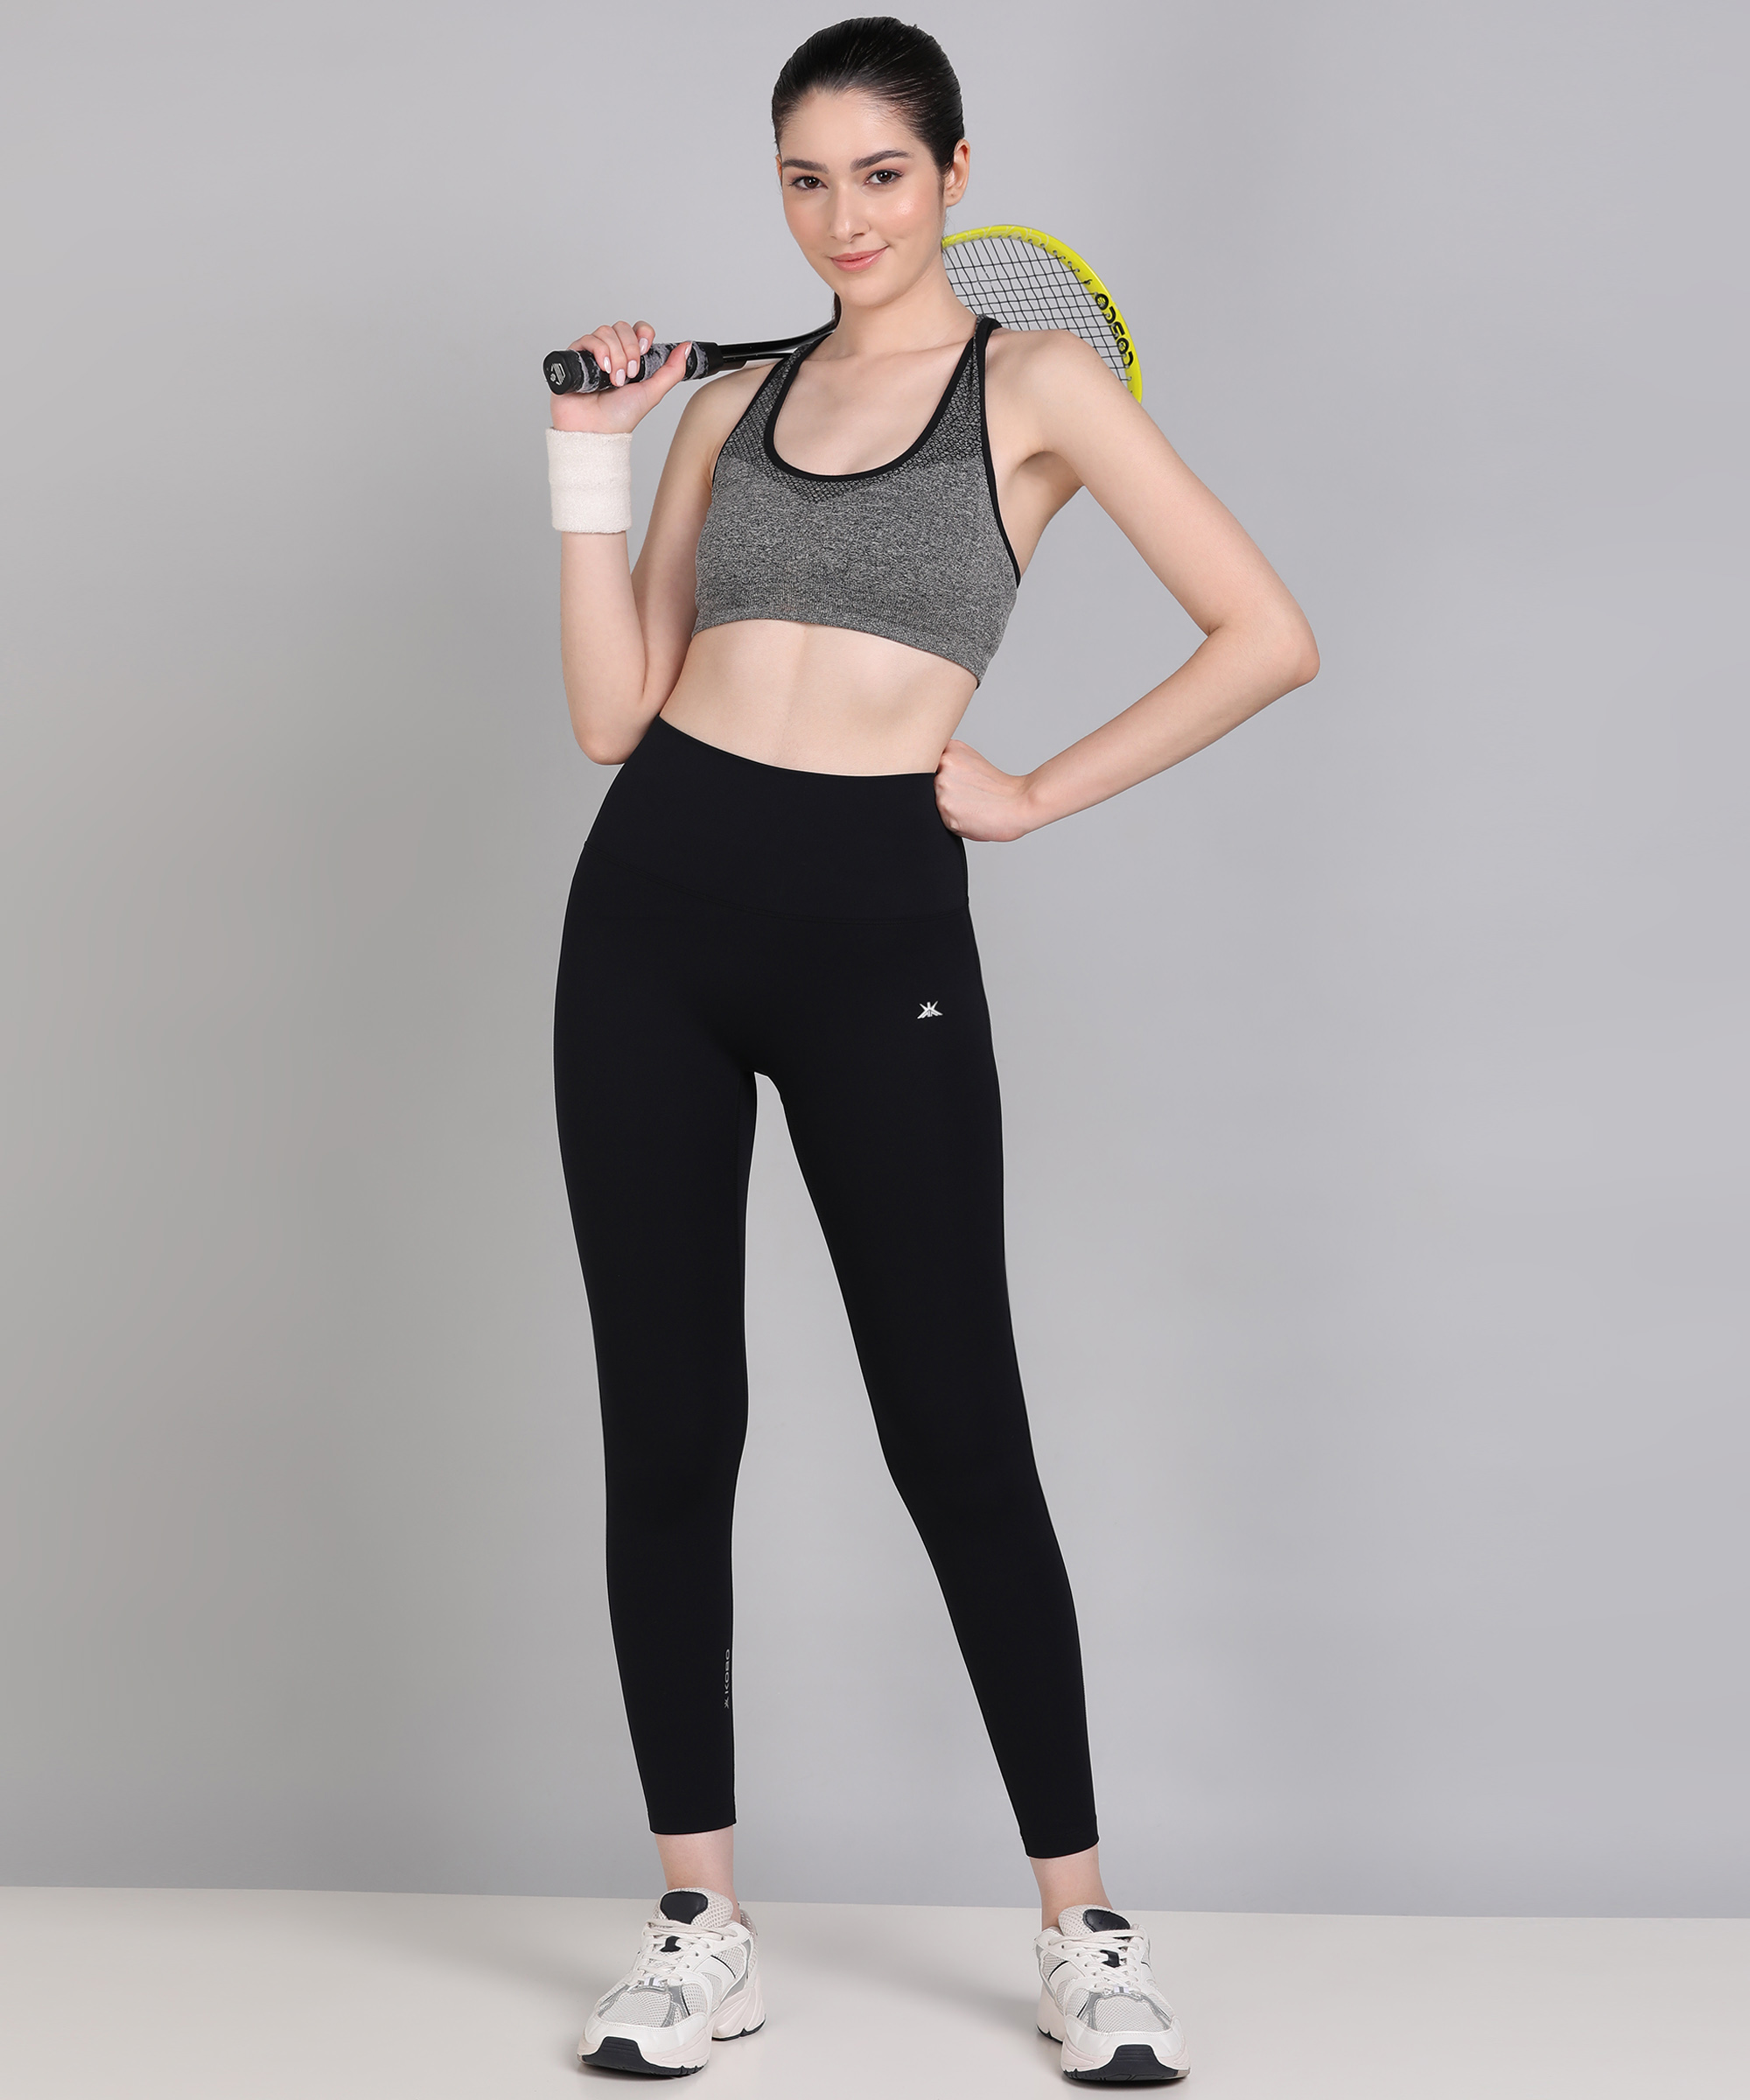 High Waist Running Tights - KOBO SPORTS Exclusively Designed For